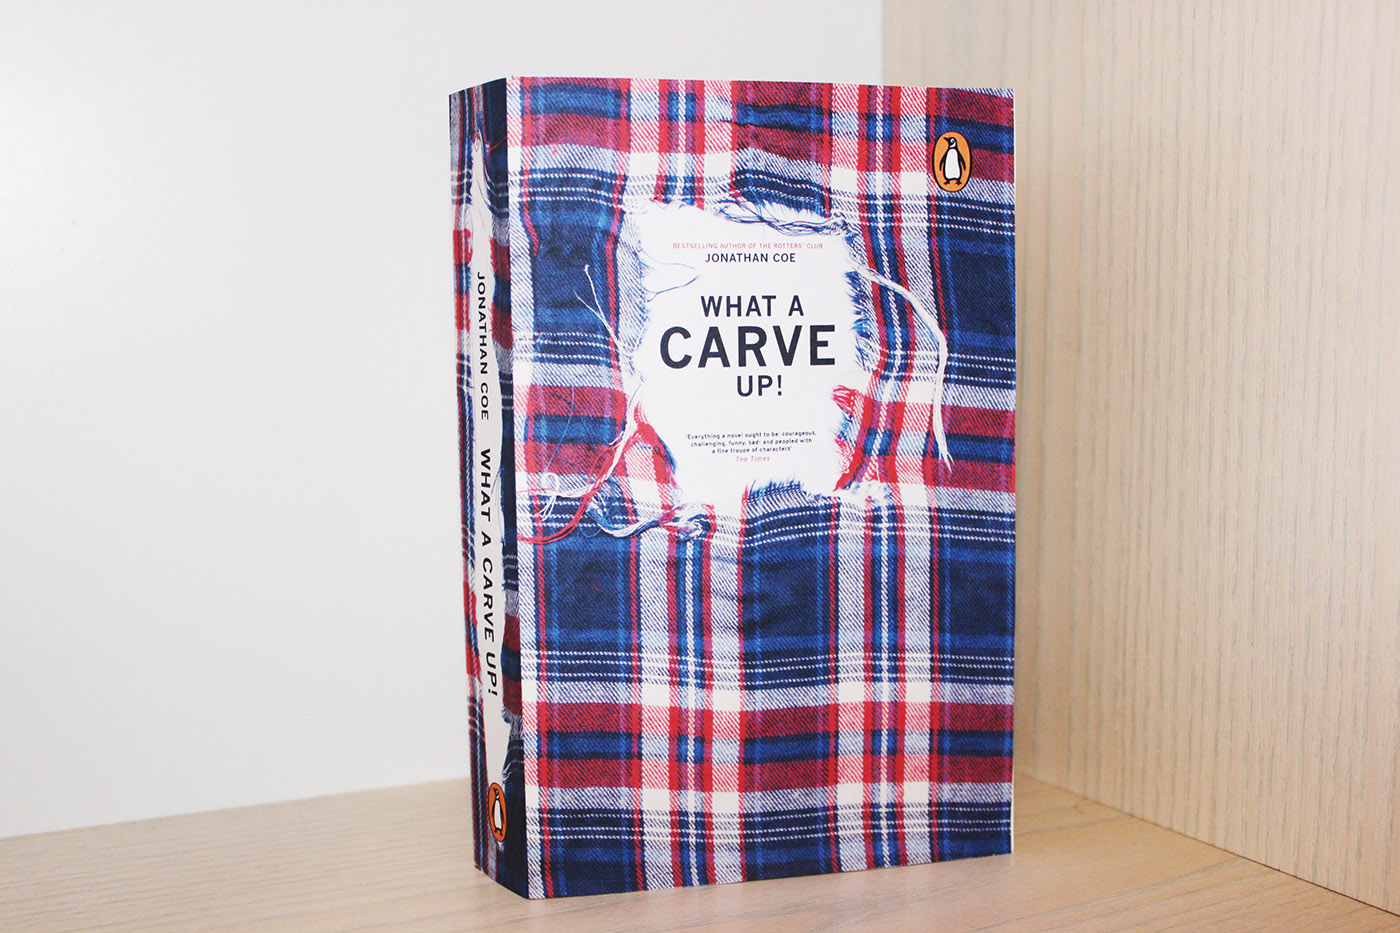 penguin book fabric editorial penguin books Competition Adult Prize design awards Textiles book cover Penguin Design Awards book design creative Layout Design